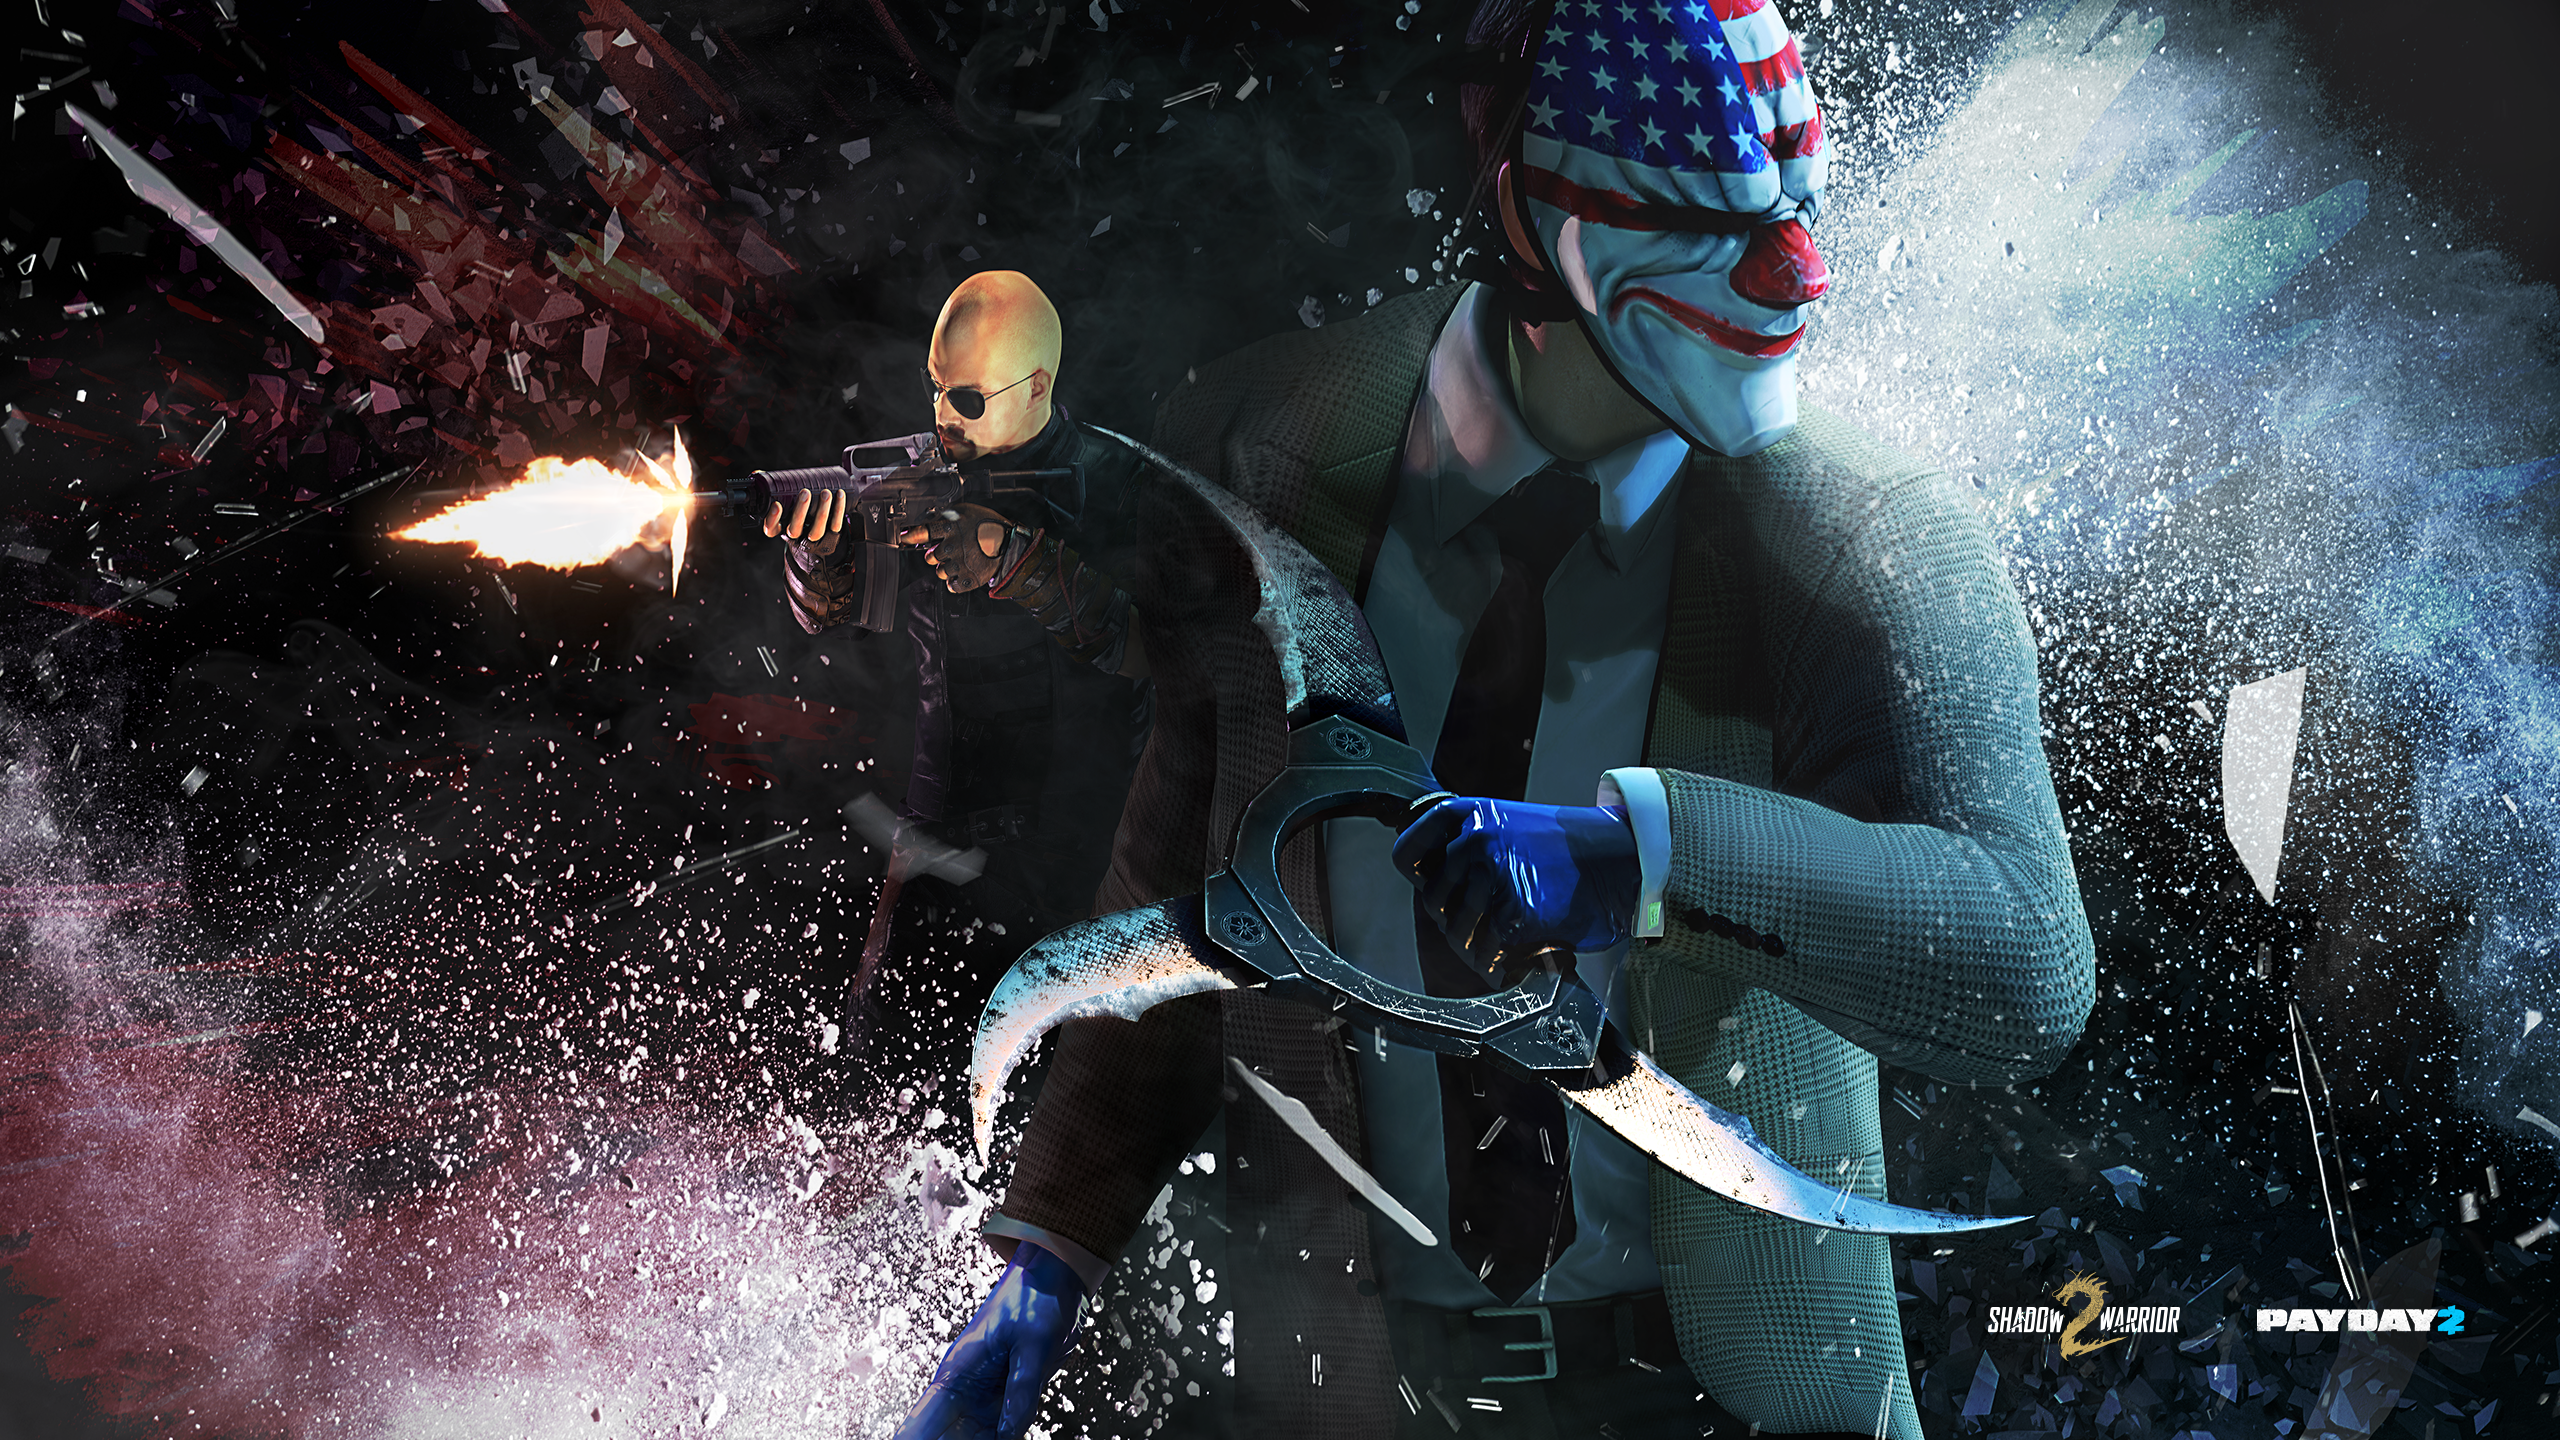 Payday 2 posters and desktop background images.